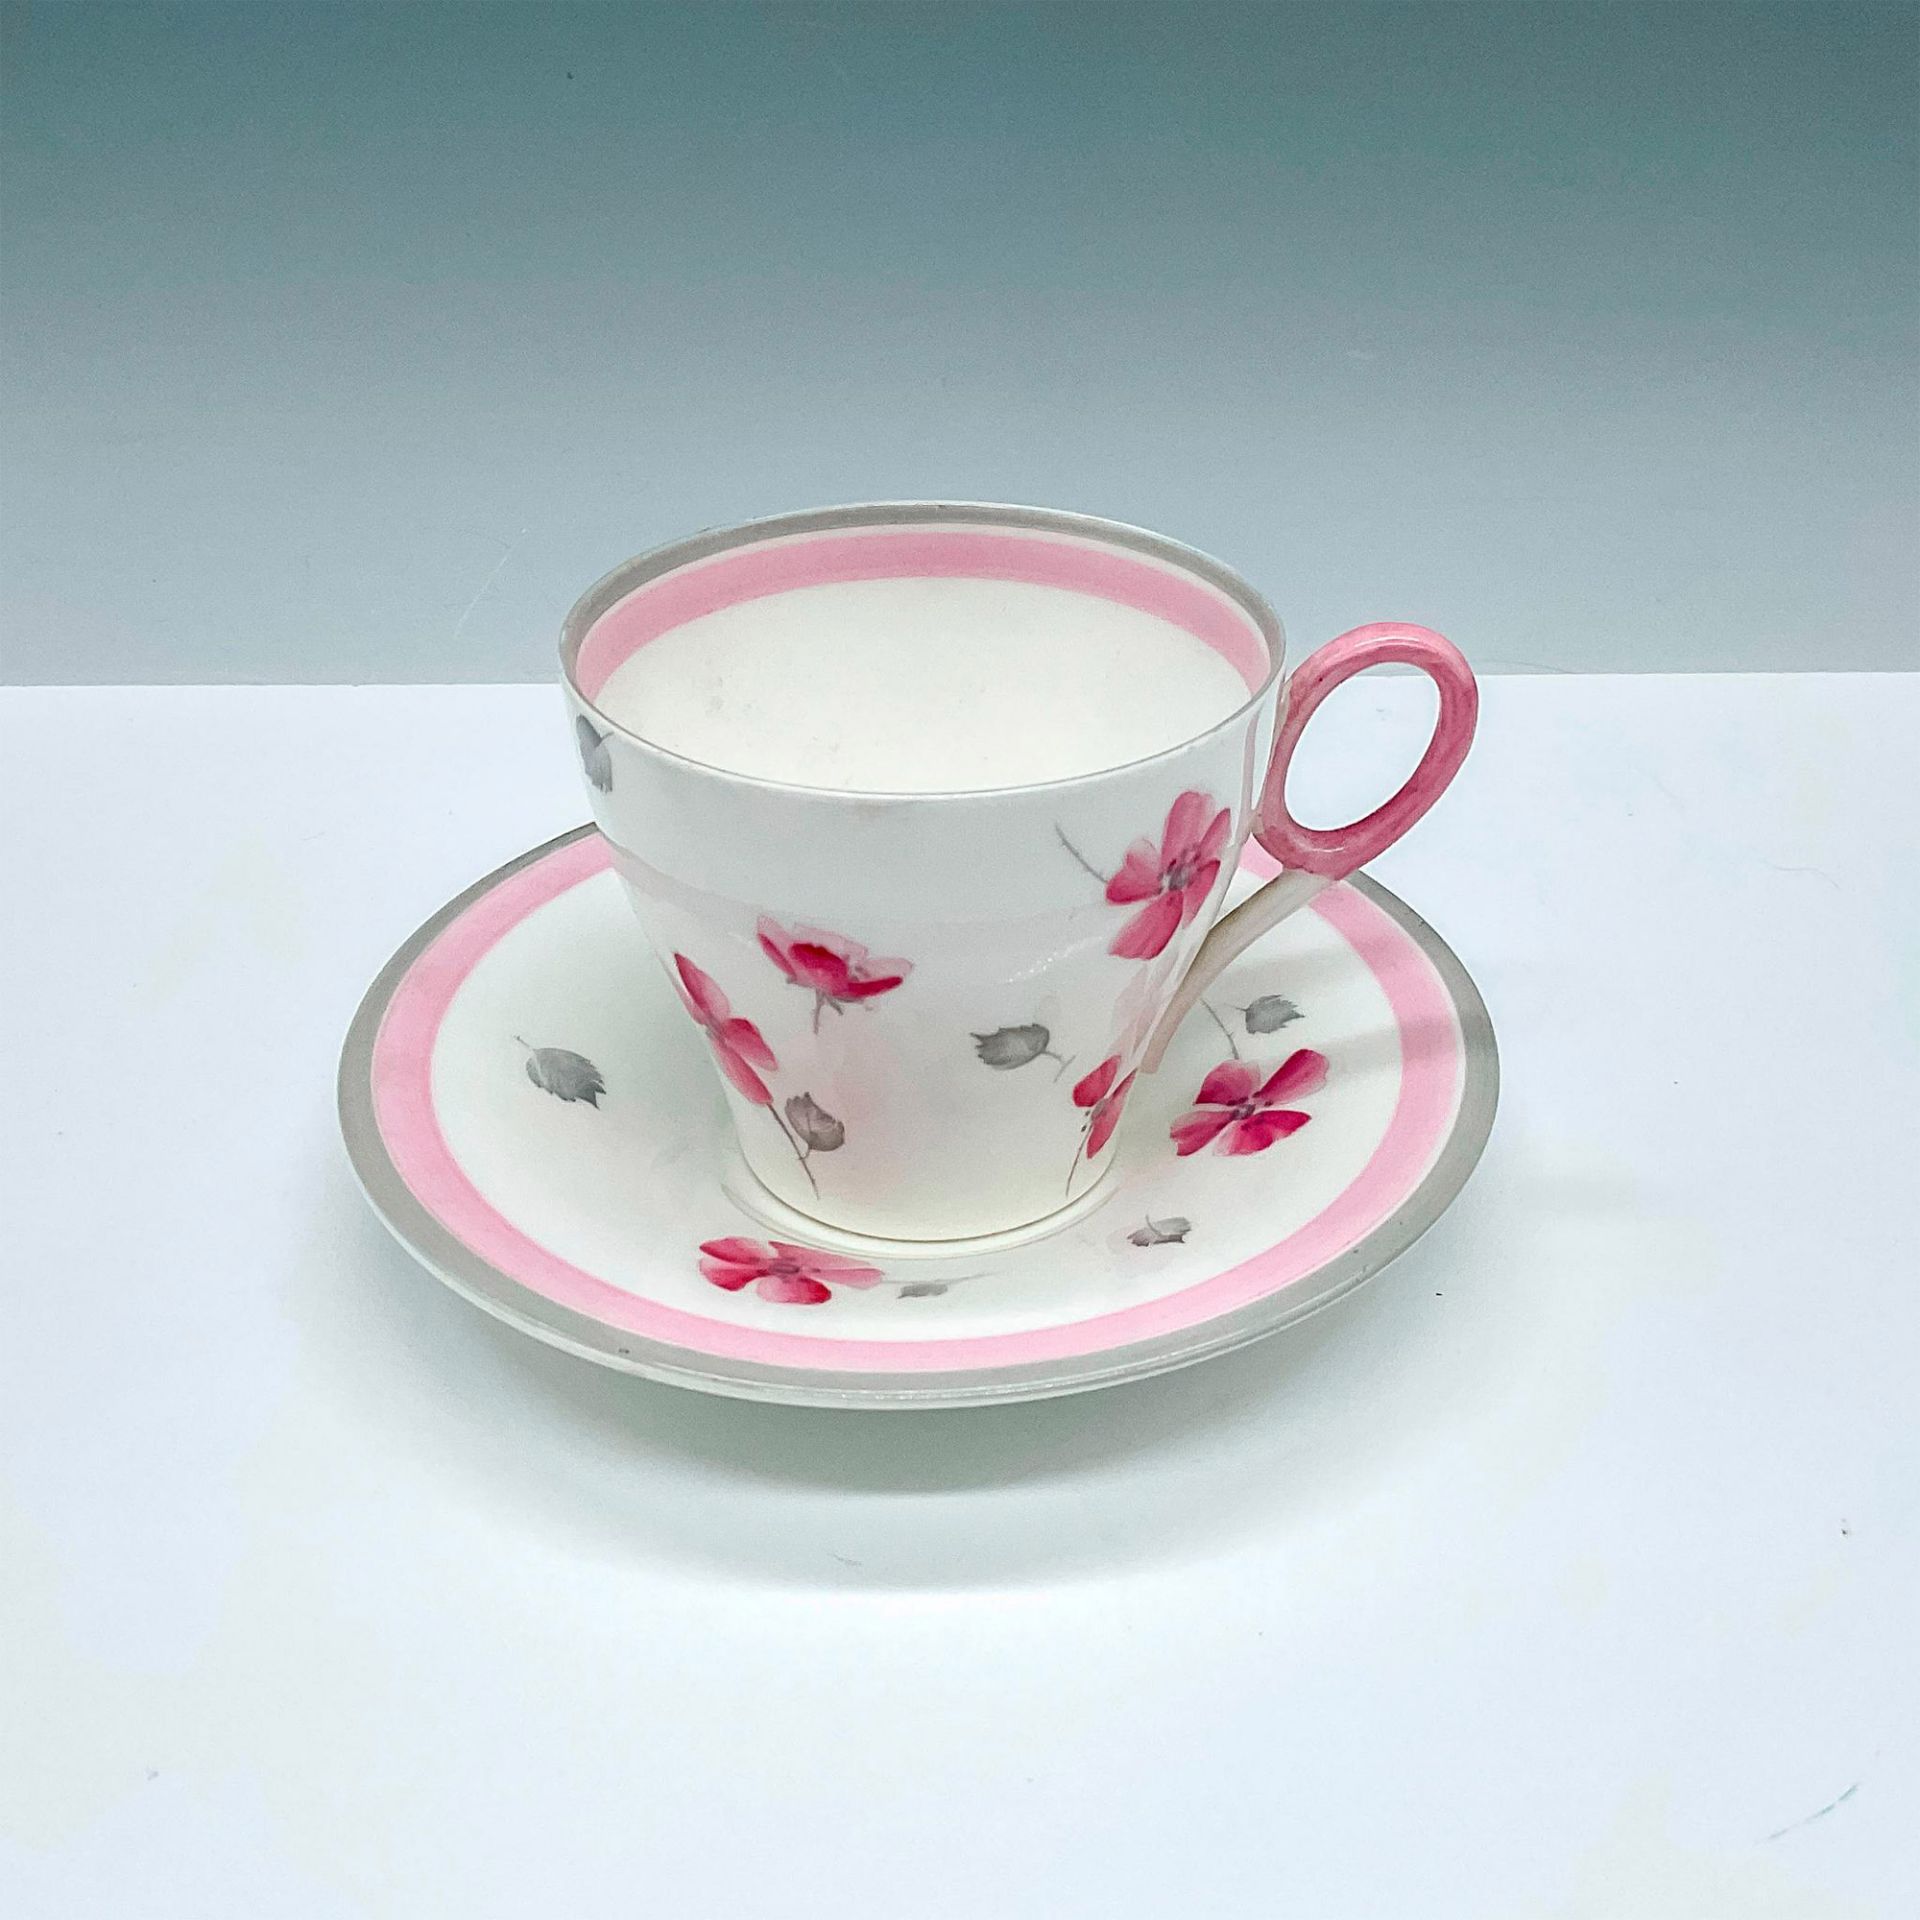 Shelley China Teacup and Saucer Set, Pink & Grey Flowers